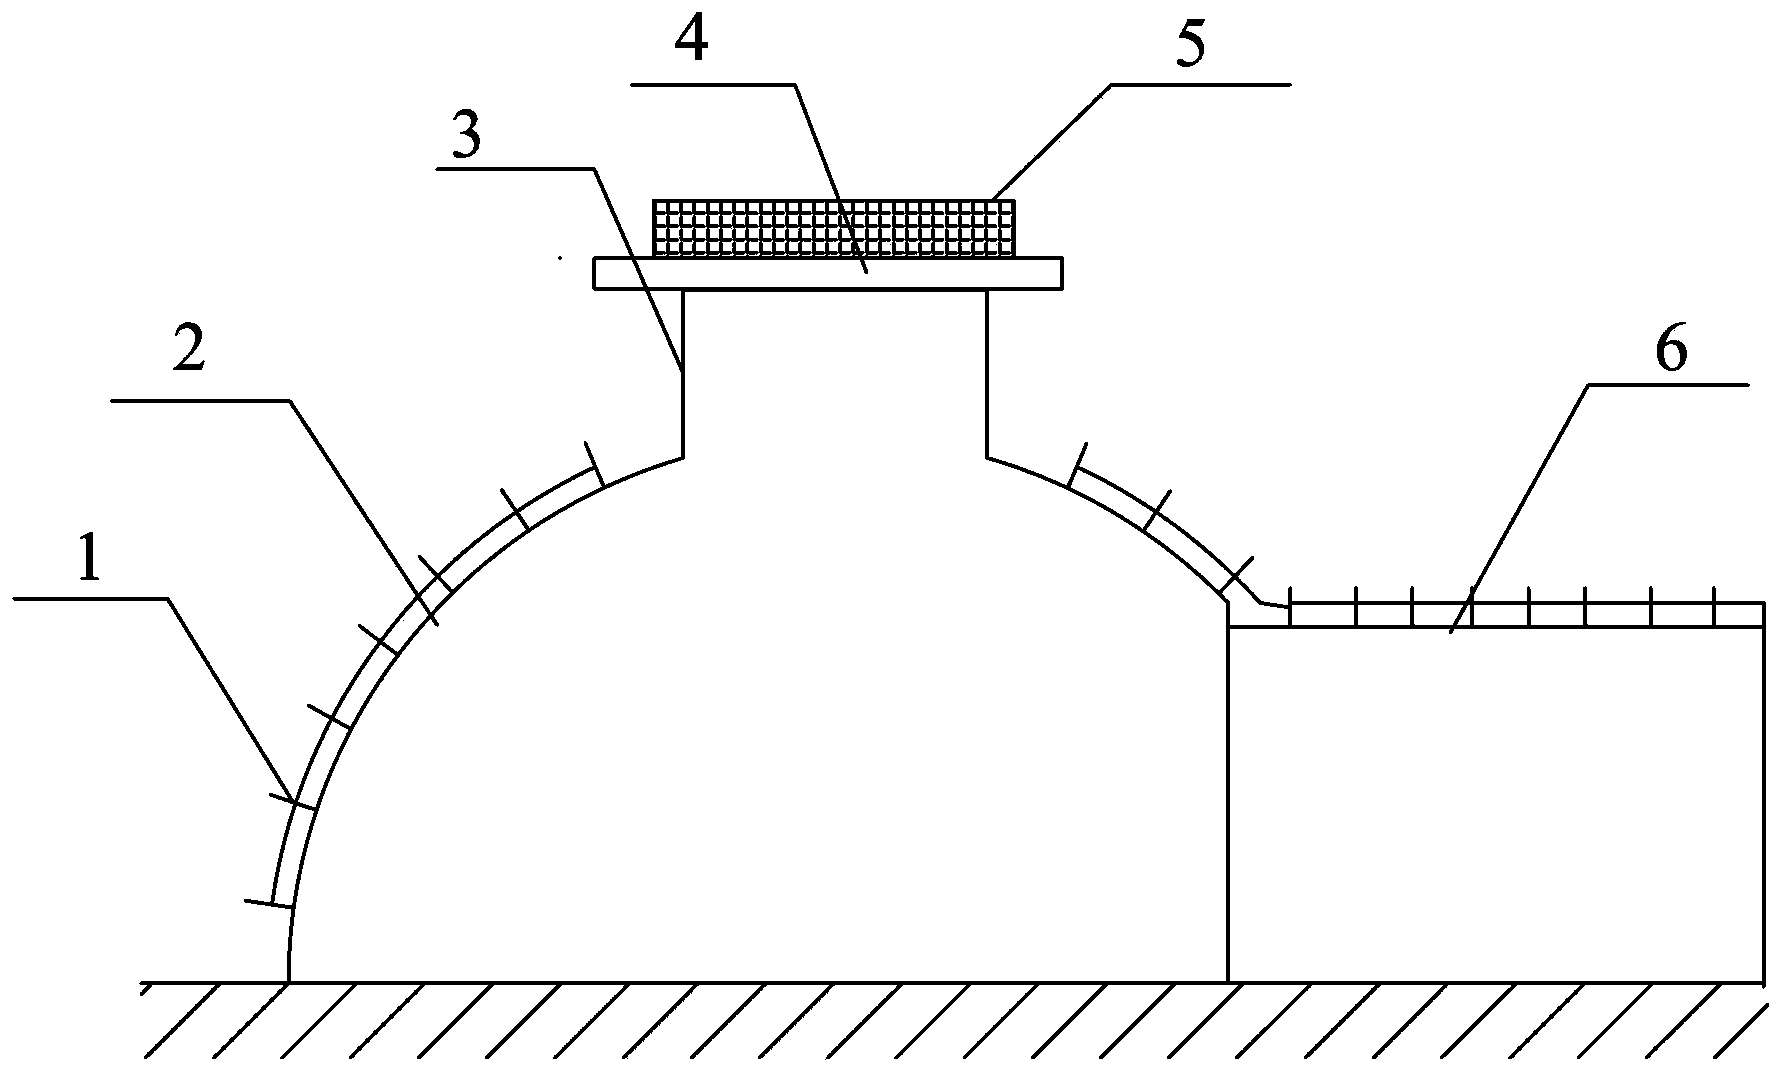 Wave blocking device for explosive welding air impact waves